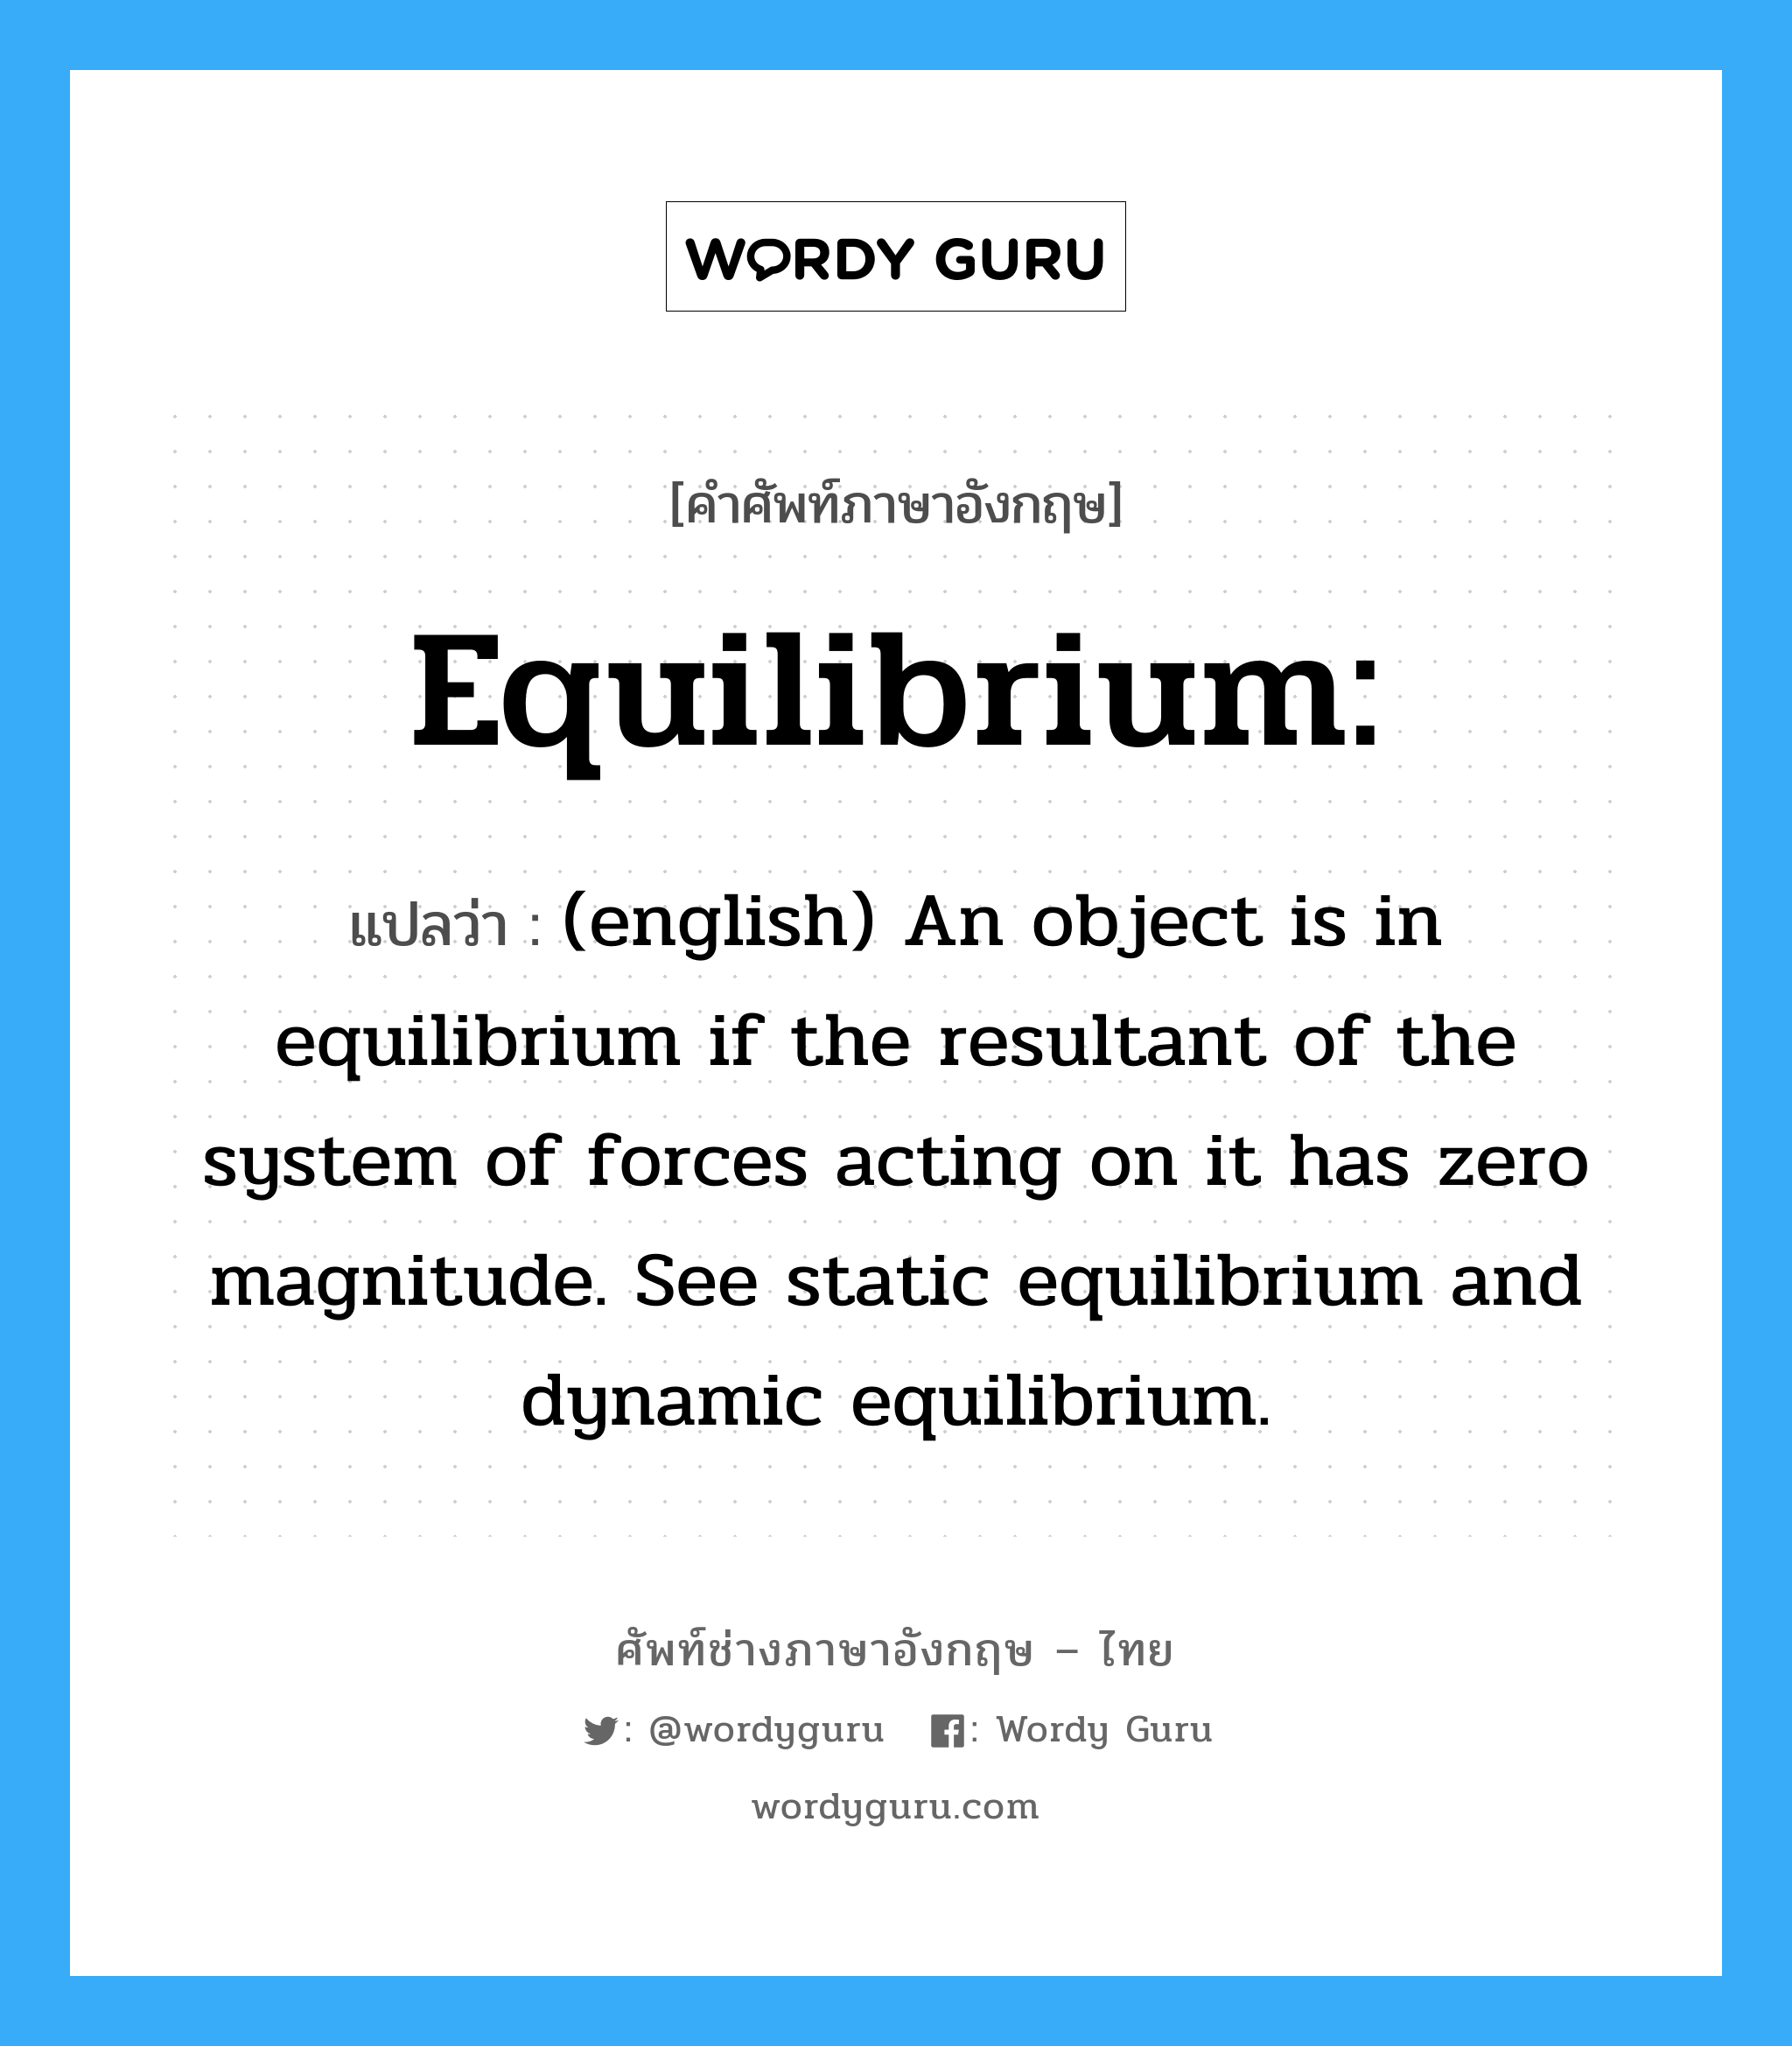 Equilibrium: แปลว่า?, คำศัพท์ช่างภาษาอังกฤษ - ไทย Equilibrium: คำศัพท์ภาษาอังกฤษ Equilibrium: แปลว่า (english) An object is in equilibrium if the resultant of the system of forces acting on it has zero magnitude. See static equilibrium and dynamic equilibrium.